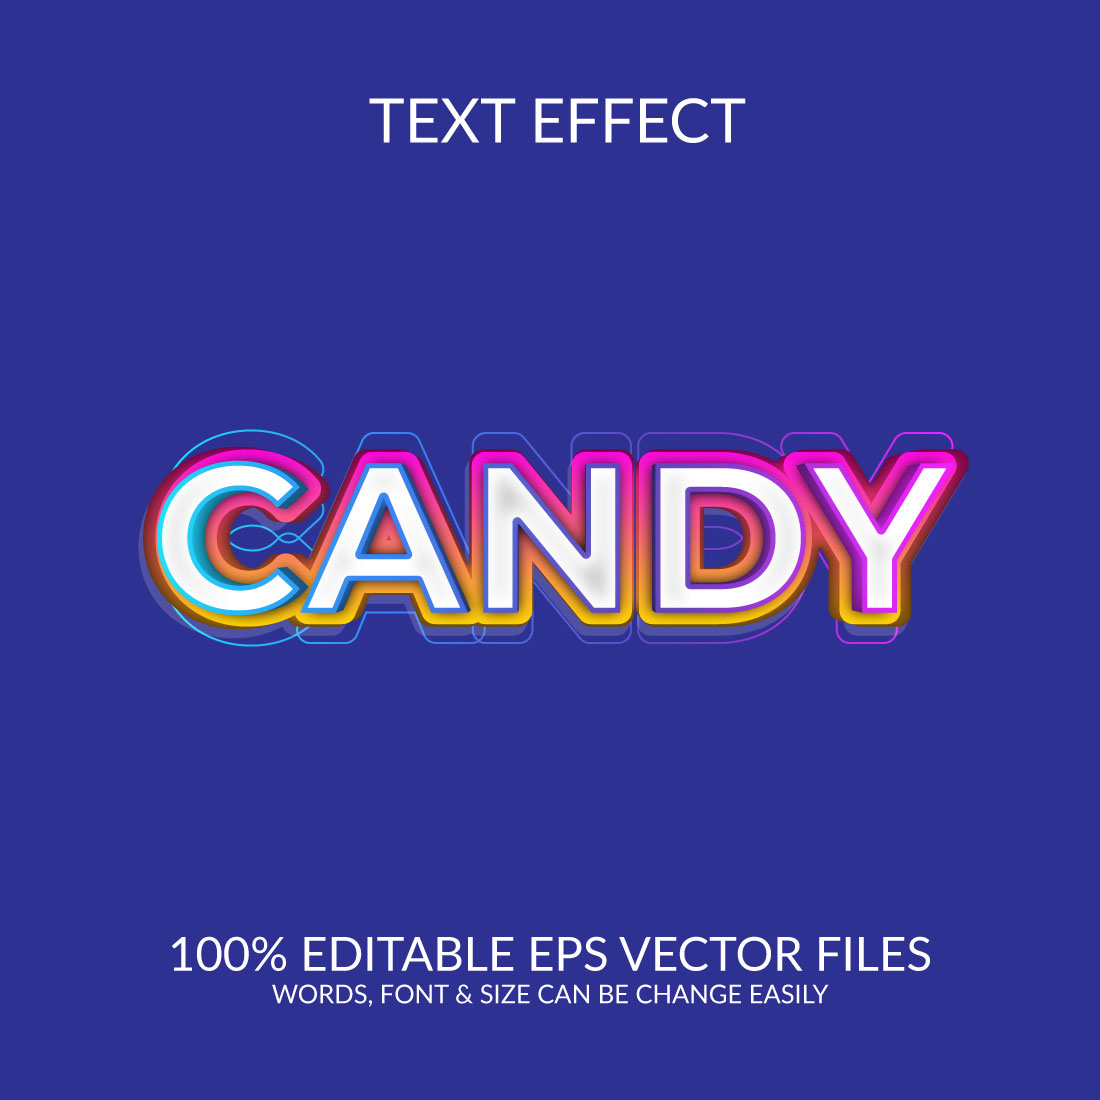 Candy 3d editable text effect template preview image.